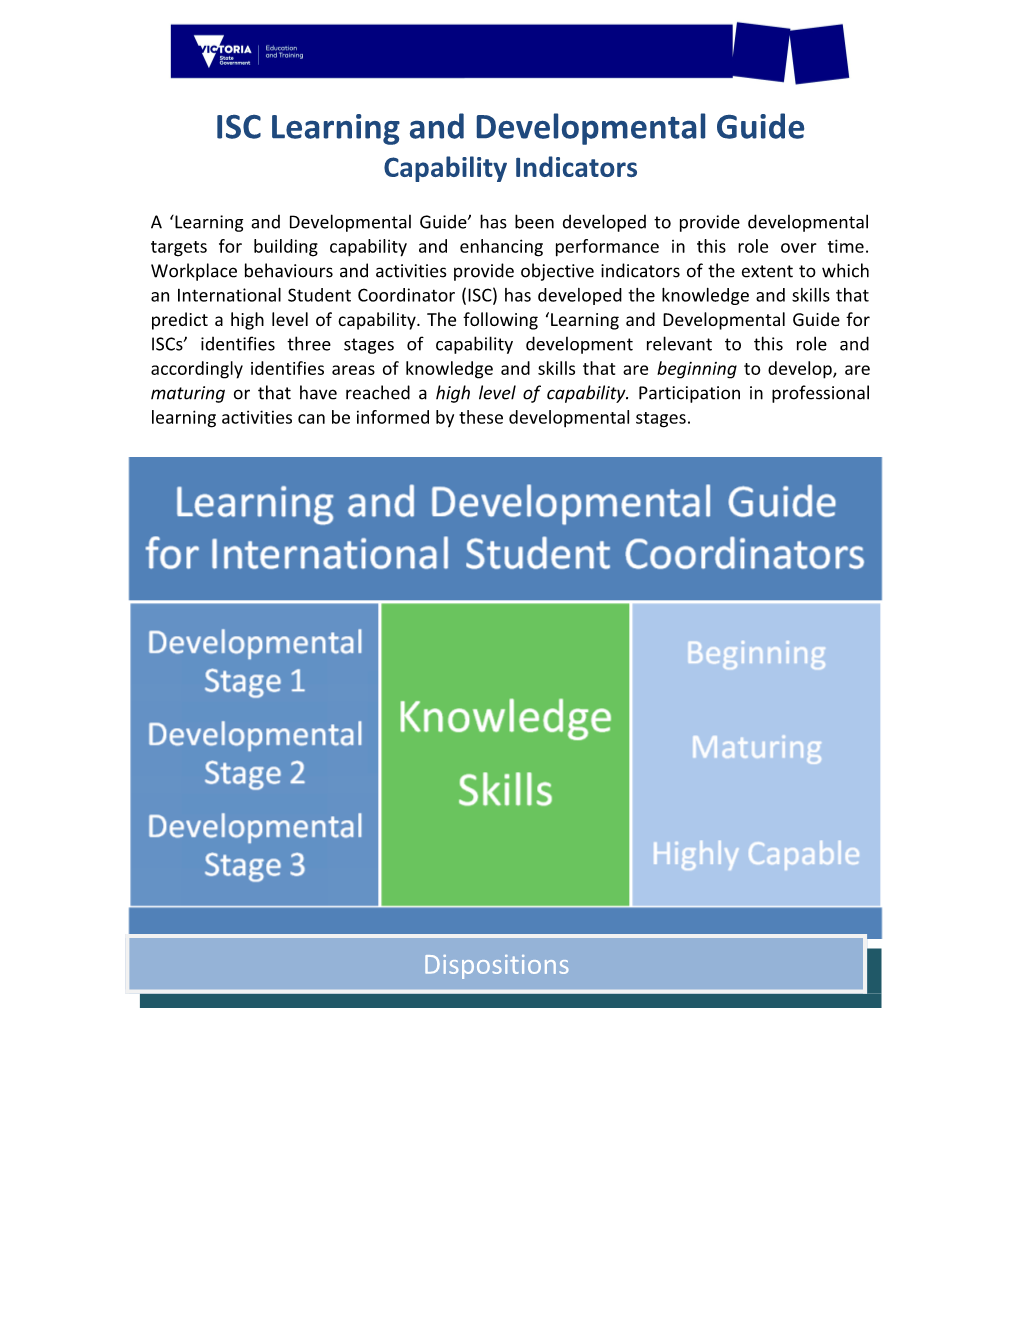 ISC Learning and Development Guide